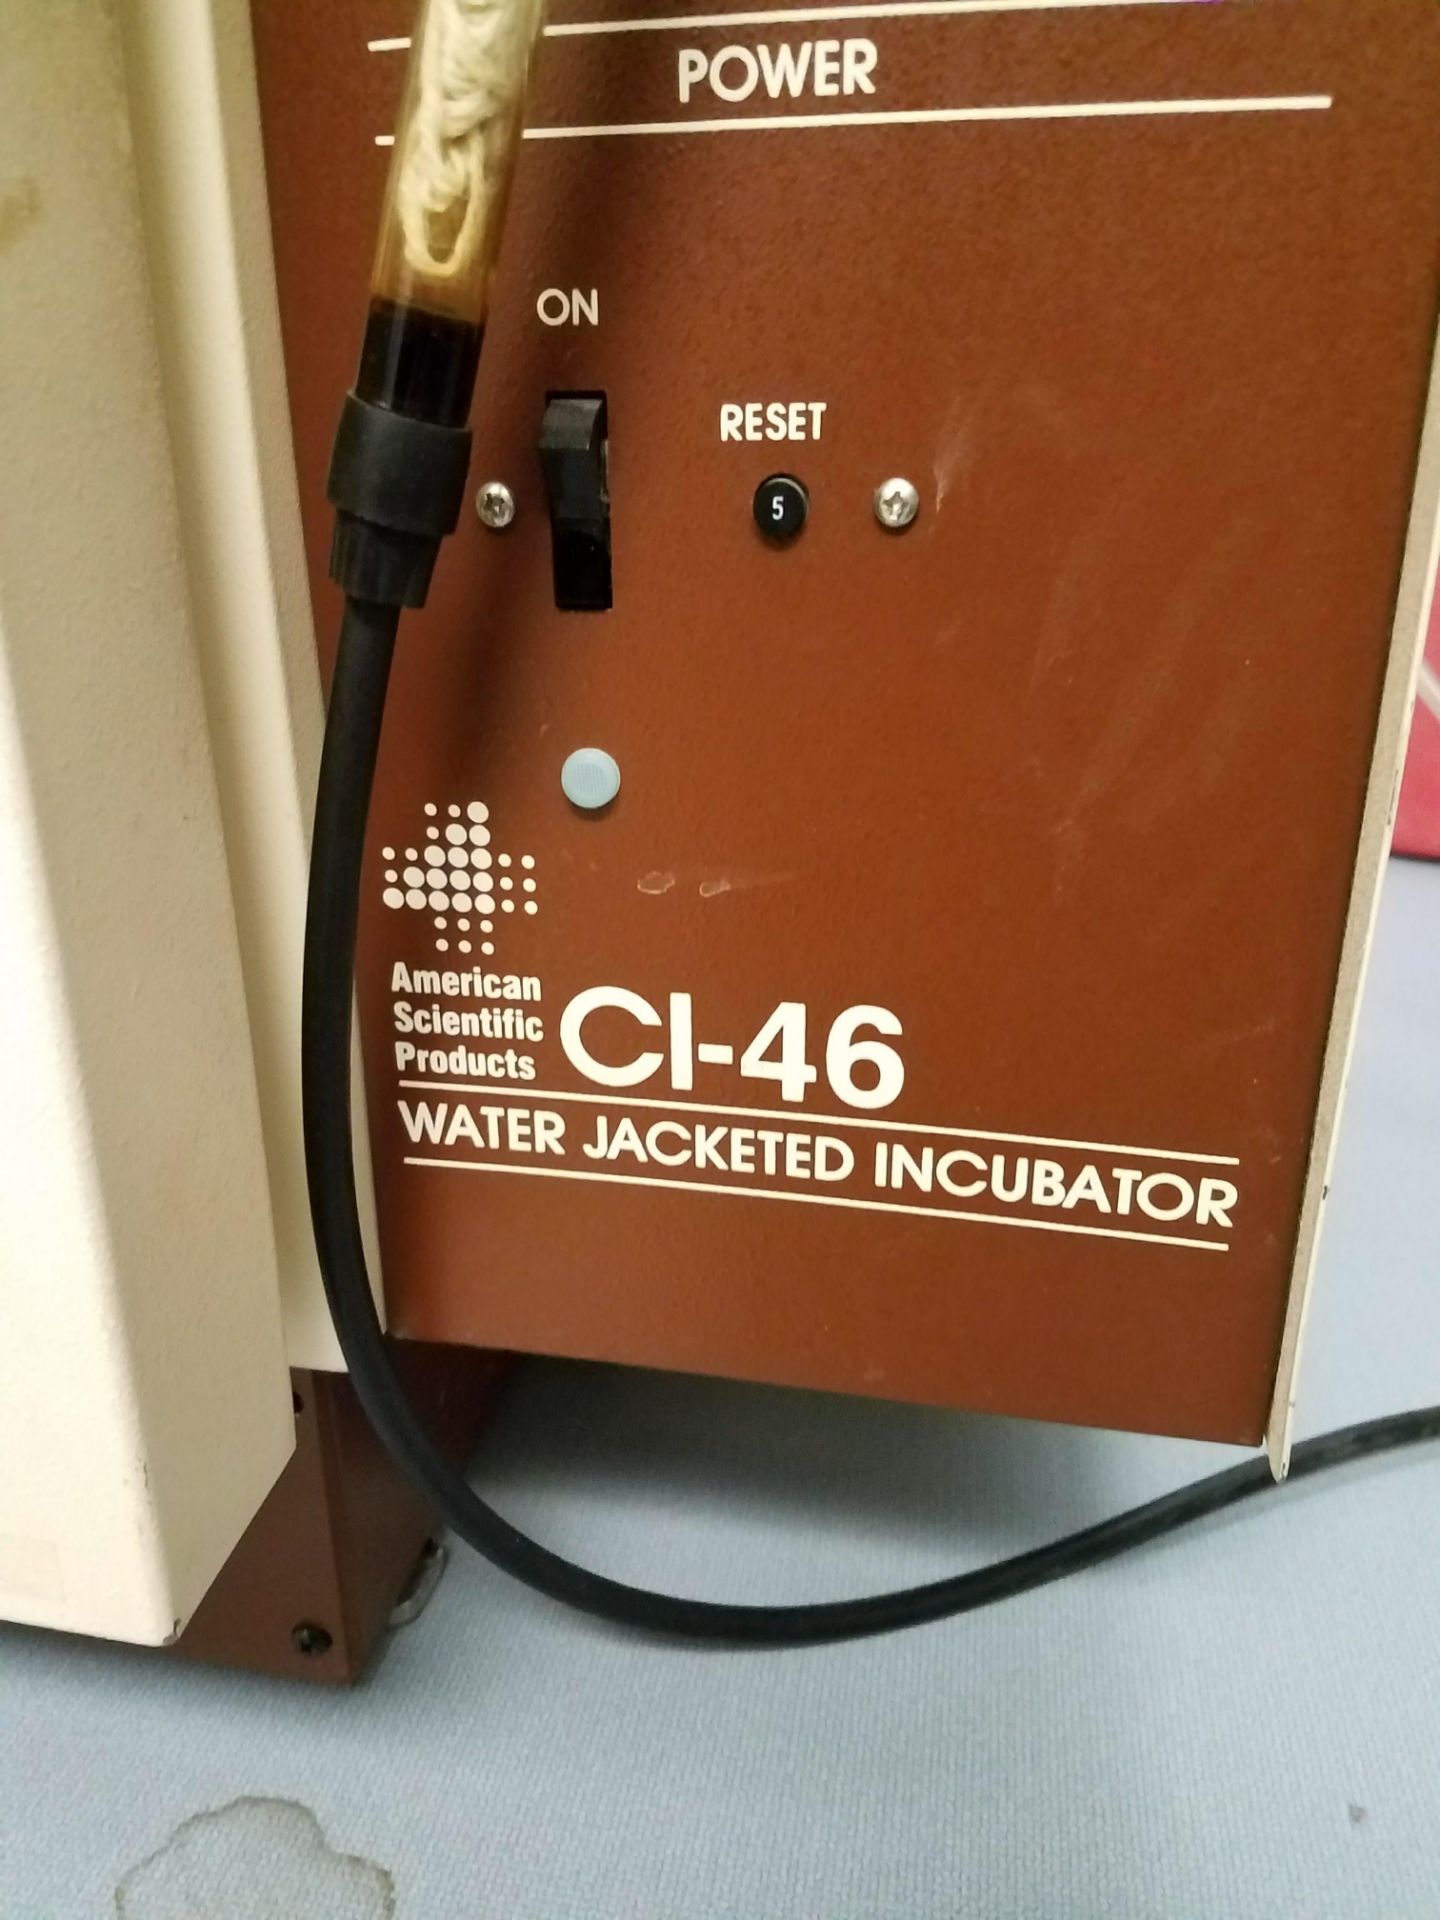 1 AMERICAN SCIENTIFIC C1-46 WATER JACKETED INCUBATOR - Image 2 of 3